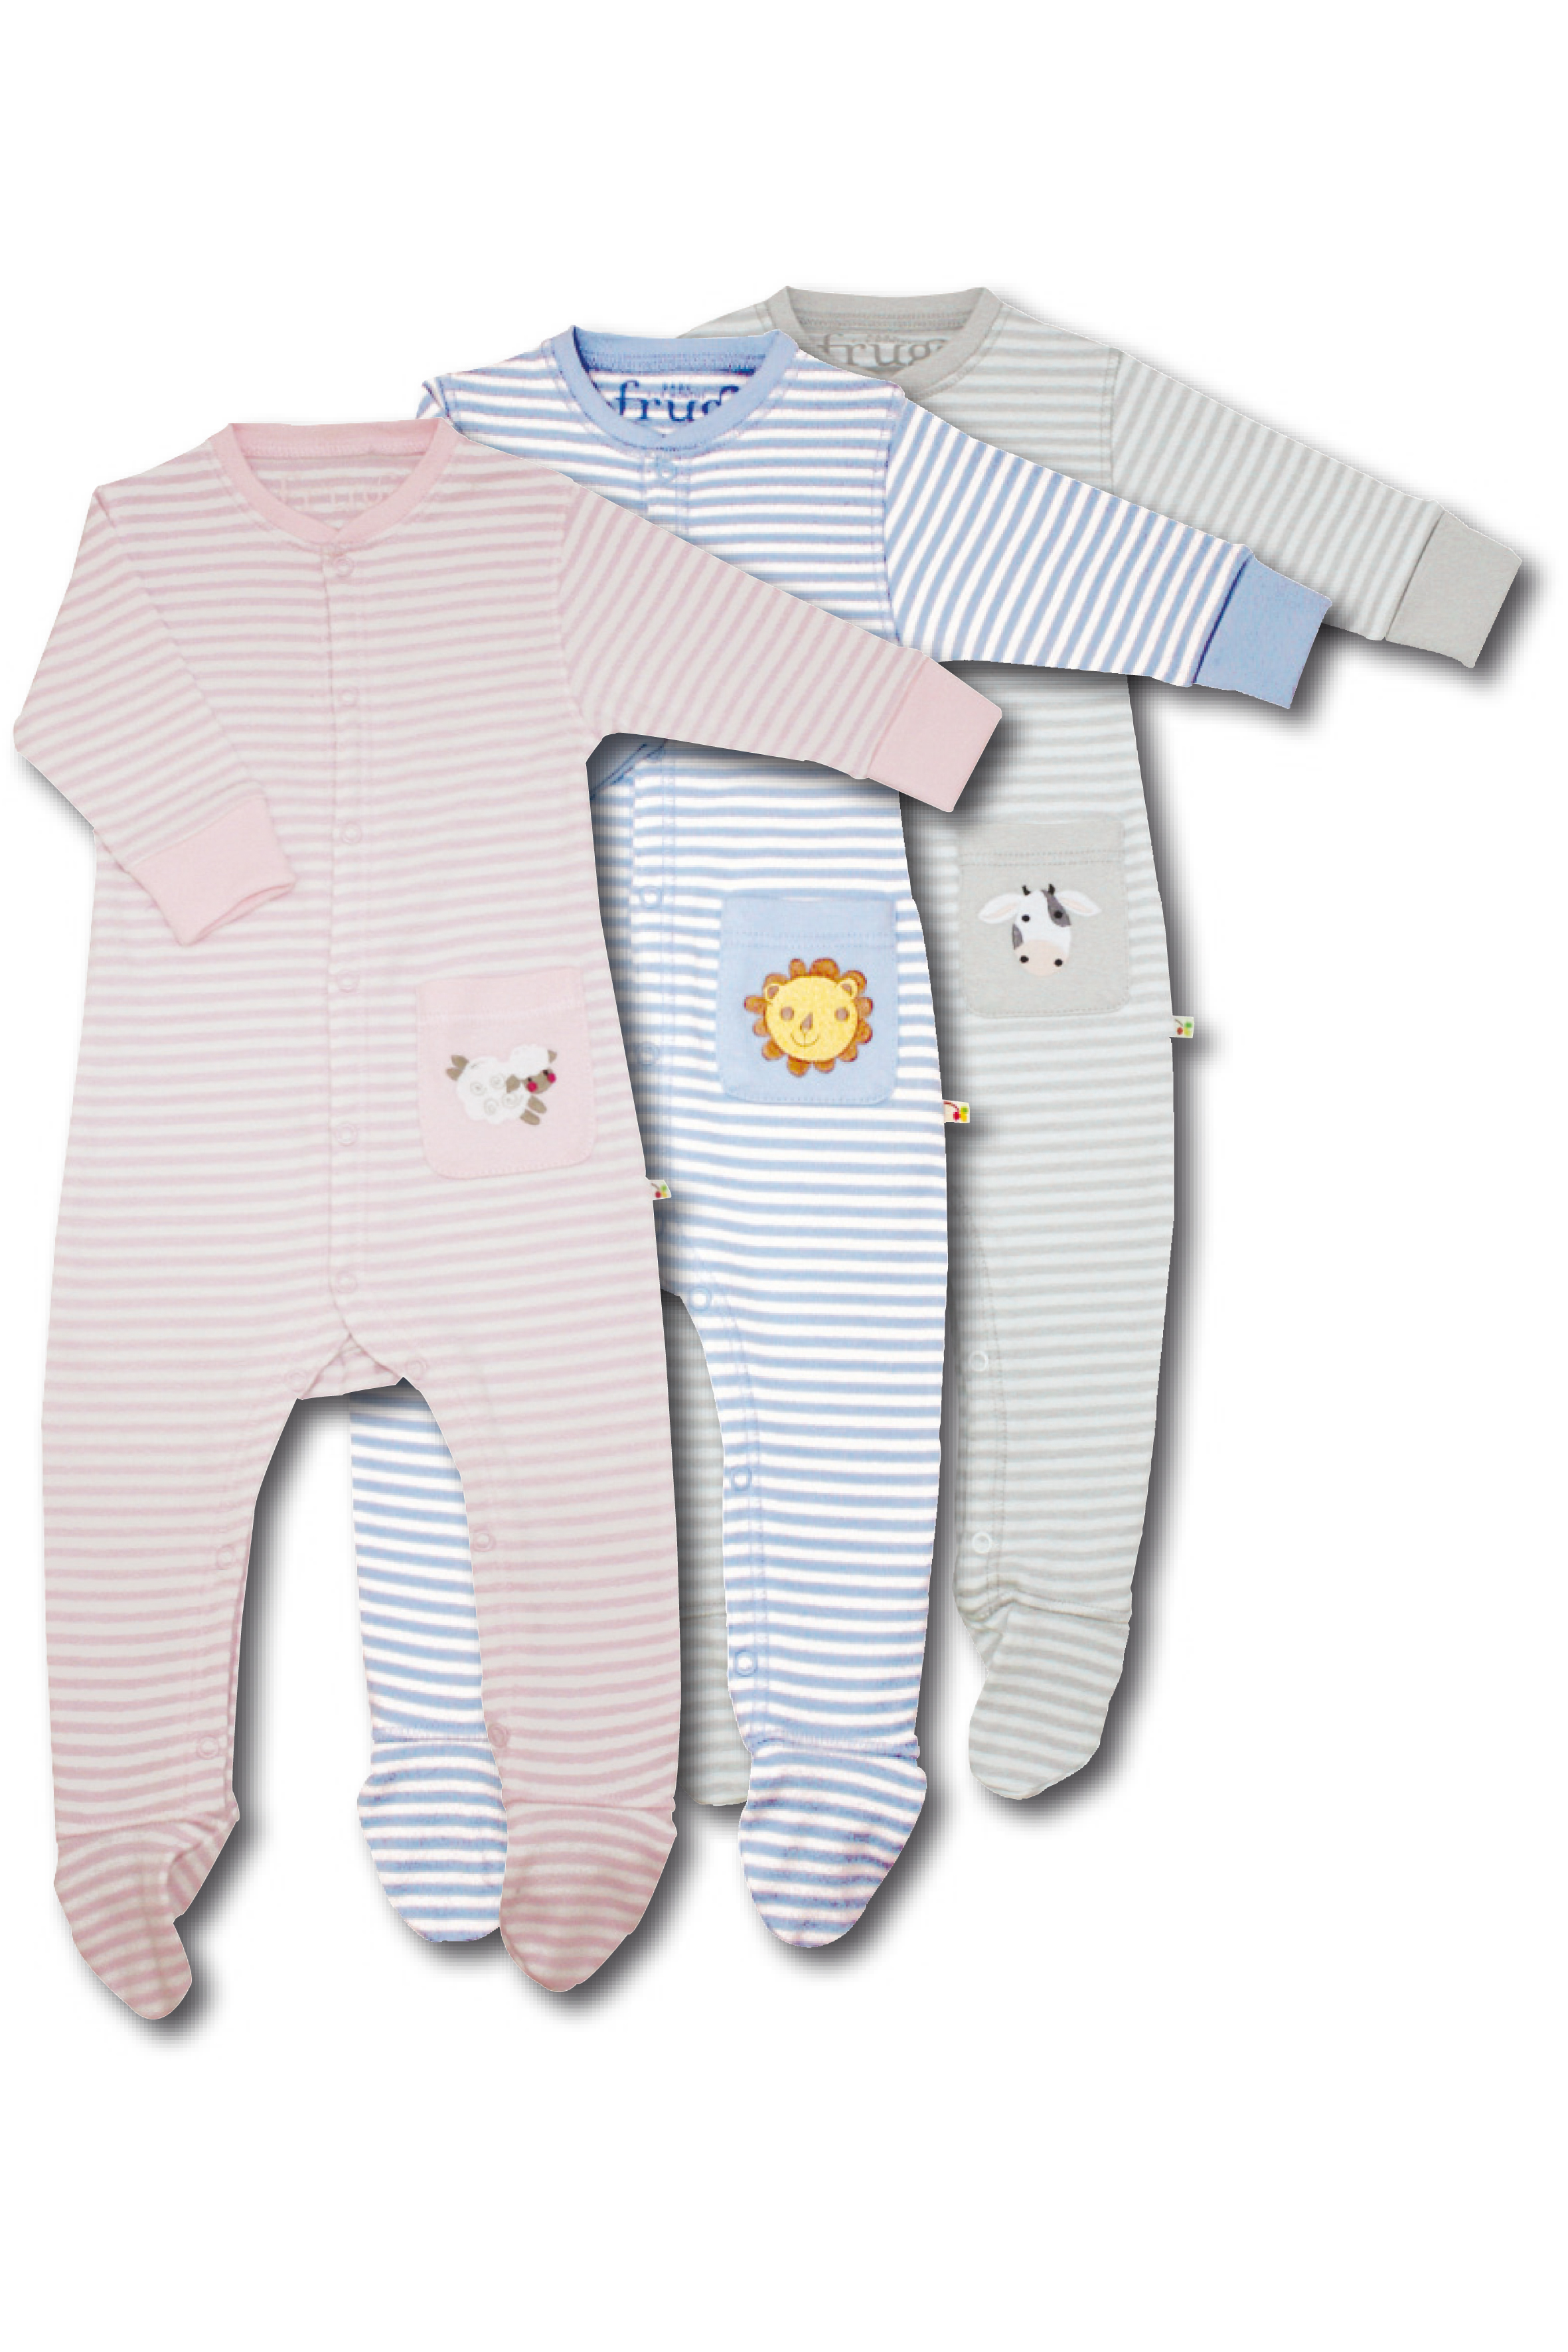 Baby Rompers Pack | babygrow packs of 3 China Factory